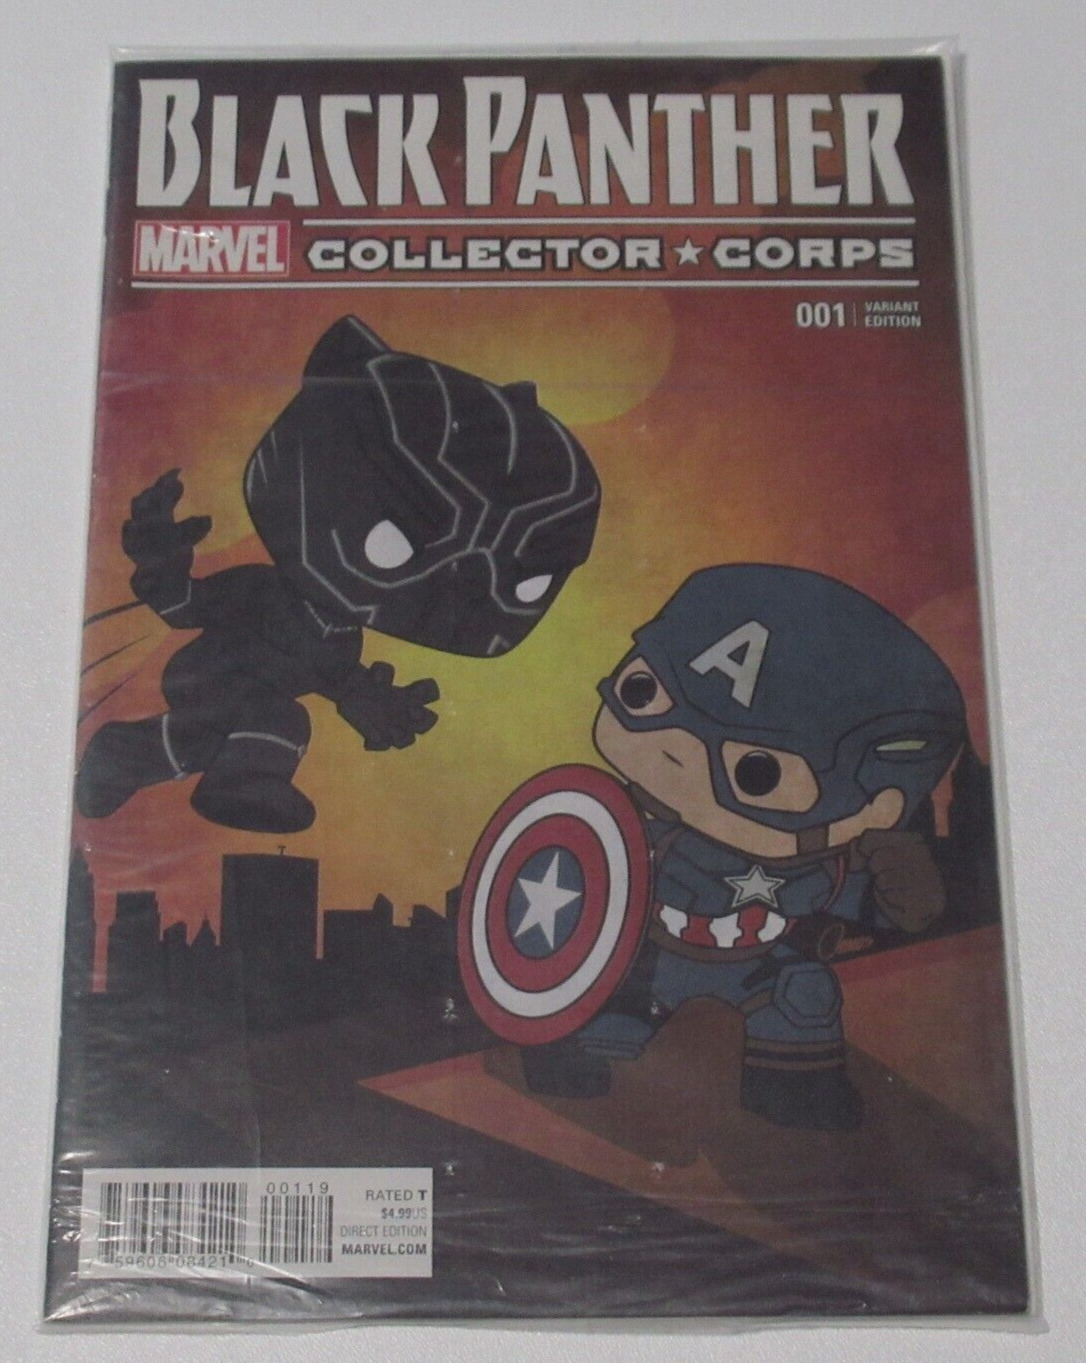 Sealed Black Panther Marvel Collector Corps #1 Comic Book Variant Edition